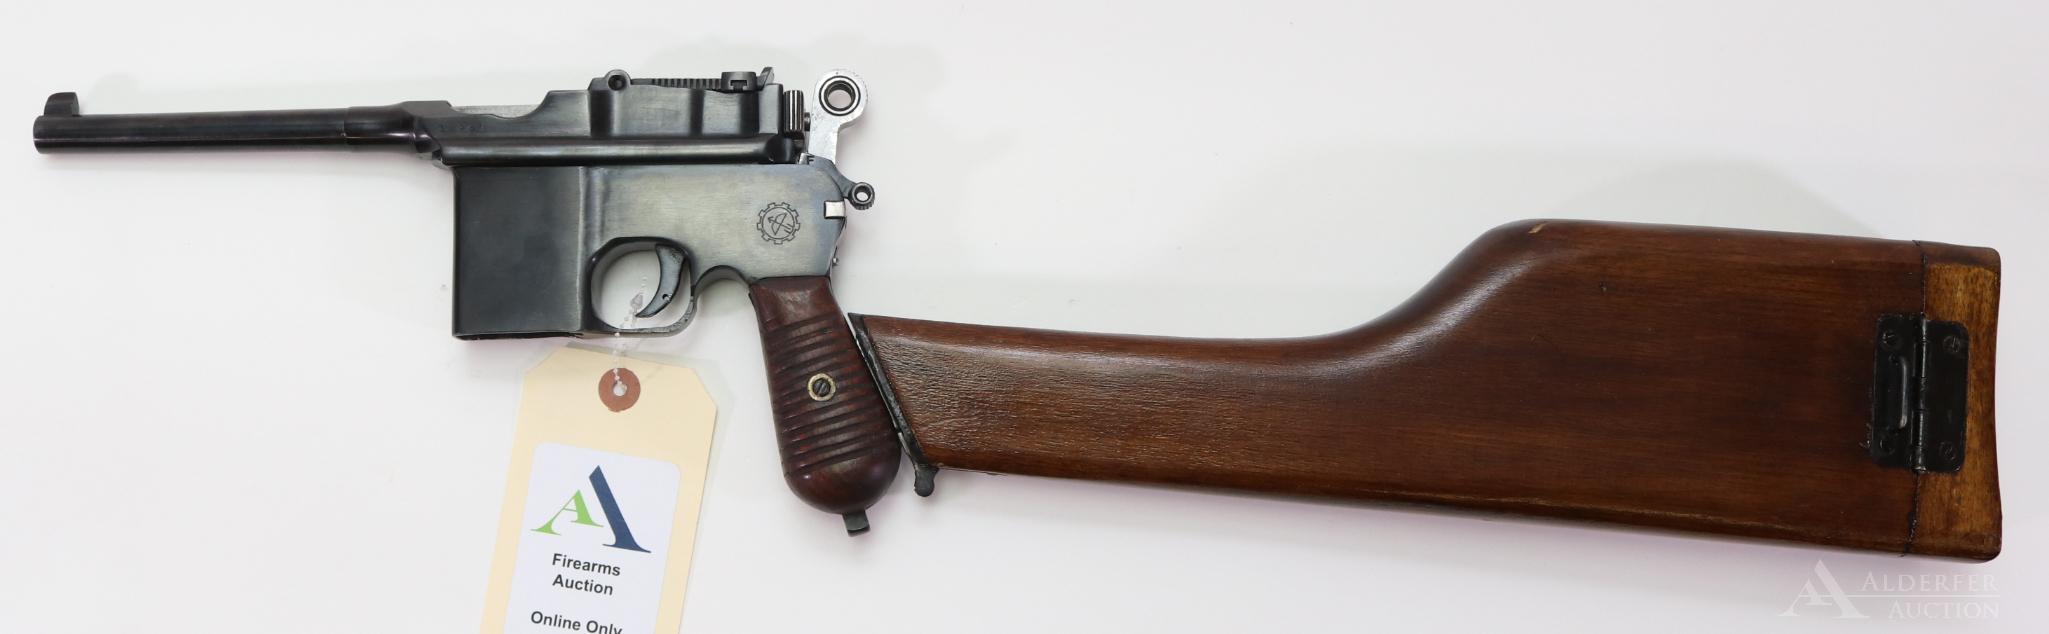 Chinese C96 Broom Handle w/ Shoulder Stock/Holster Semi-Automatic Pistol.